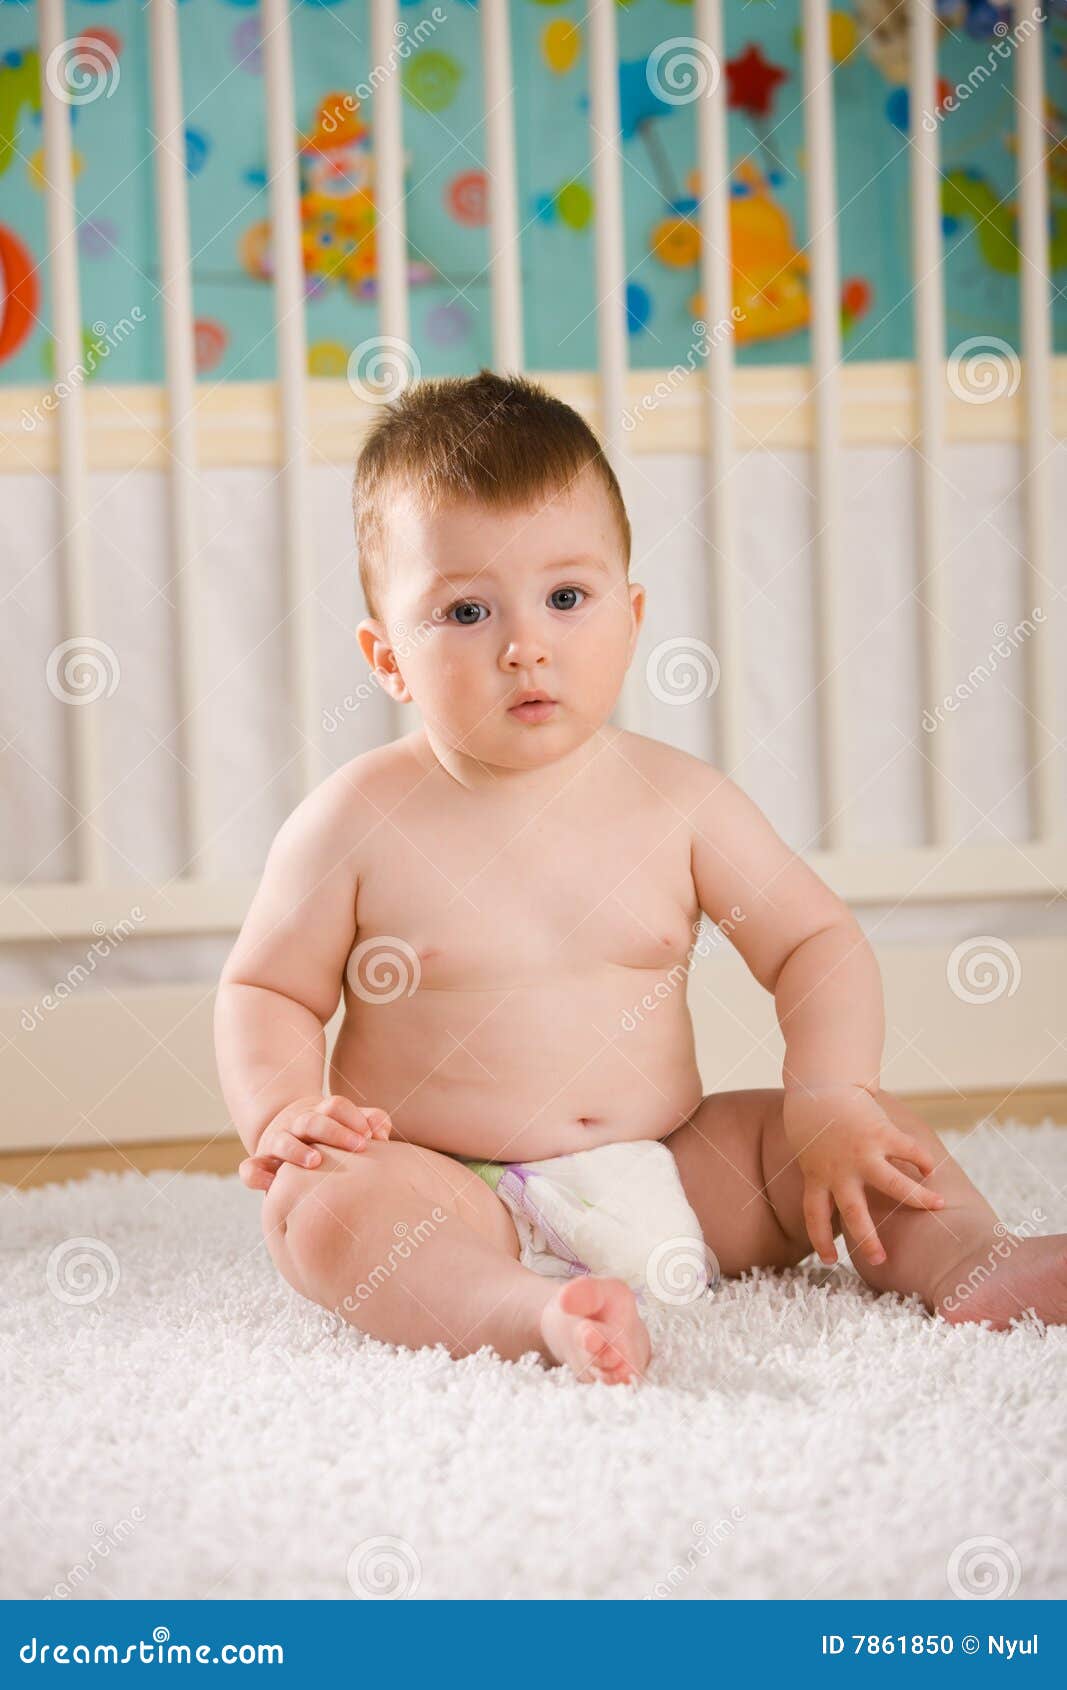 Nude Toddlers Pictures Stock Photos, Pictures & Royalty 